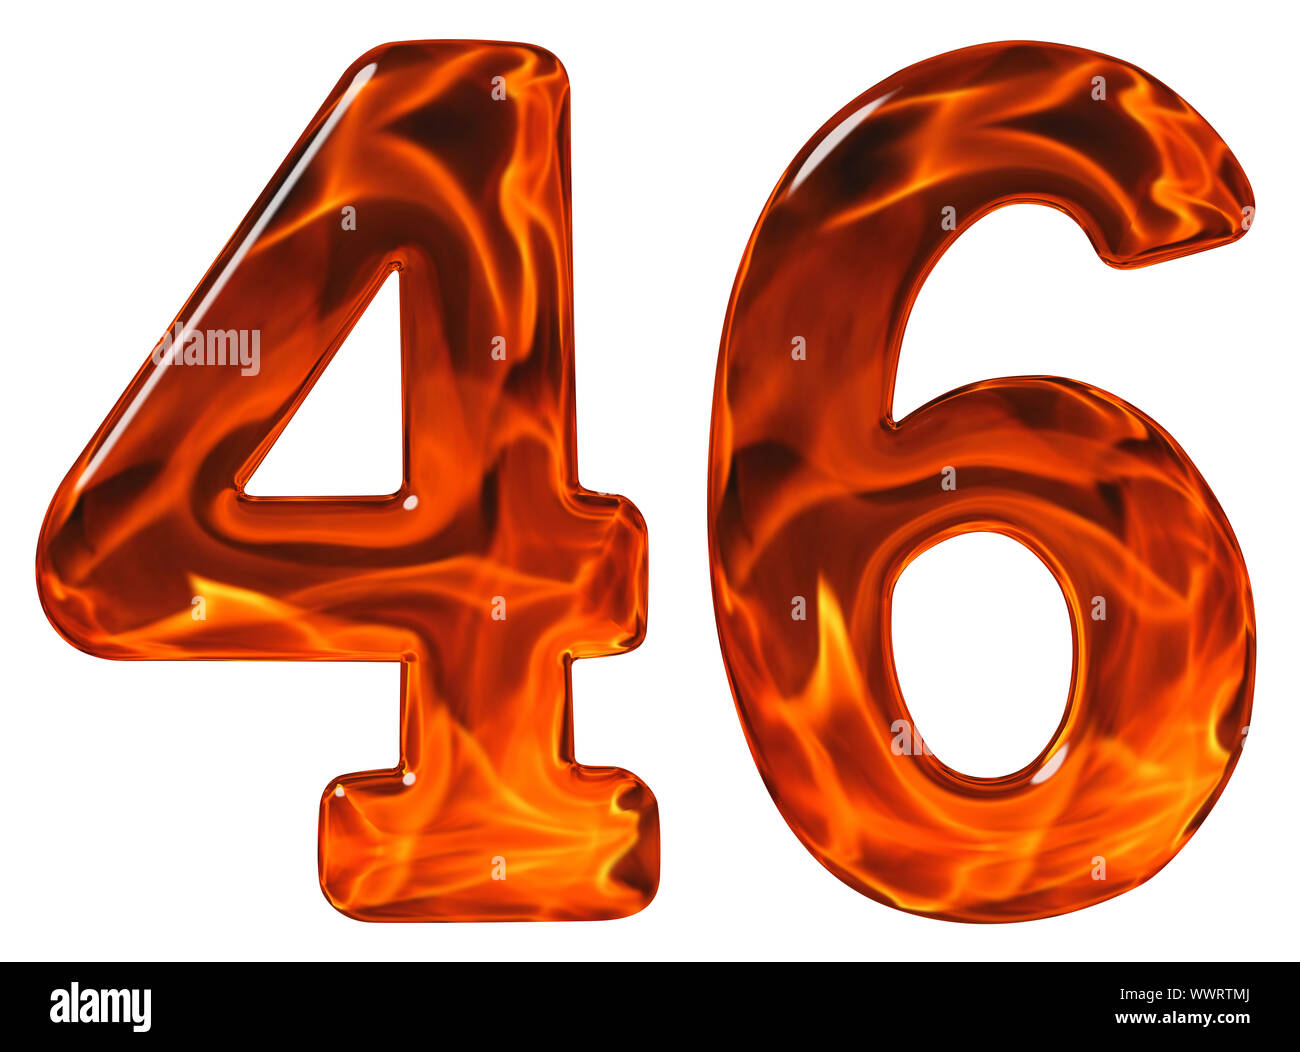 46, forty six, numeral, imitation glass and a blazing fire